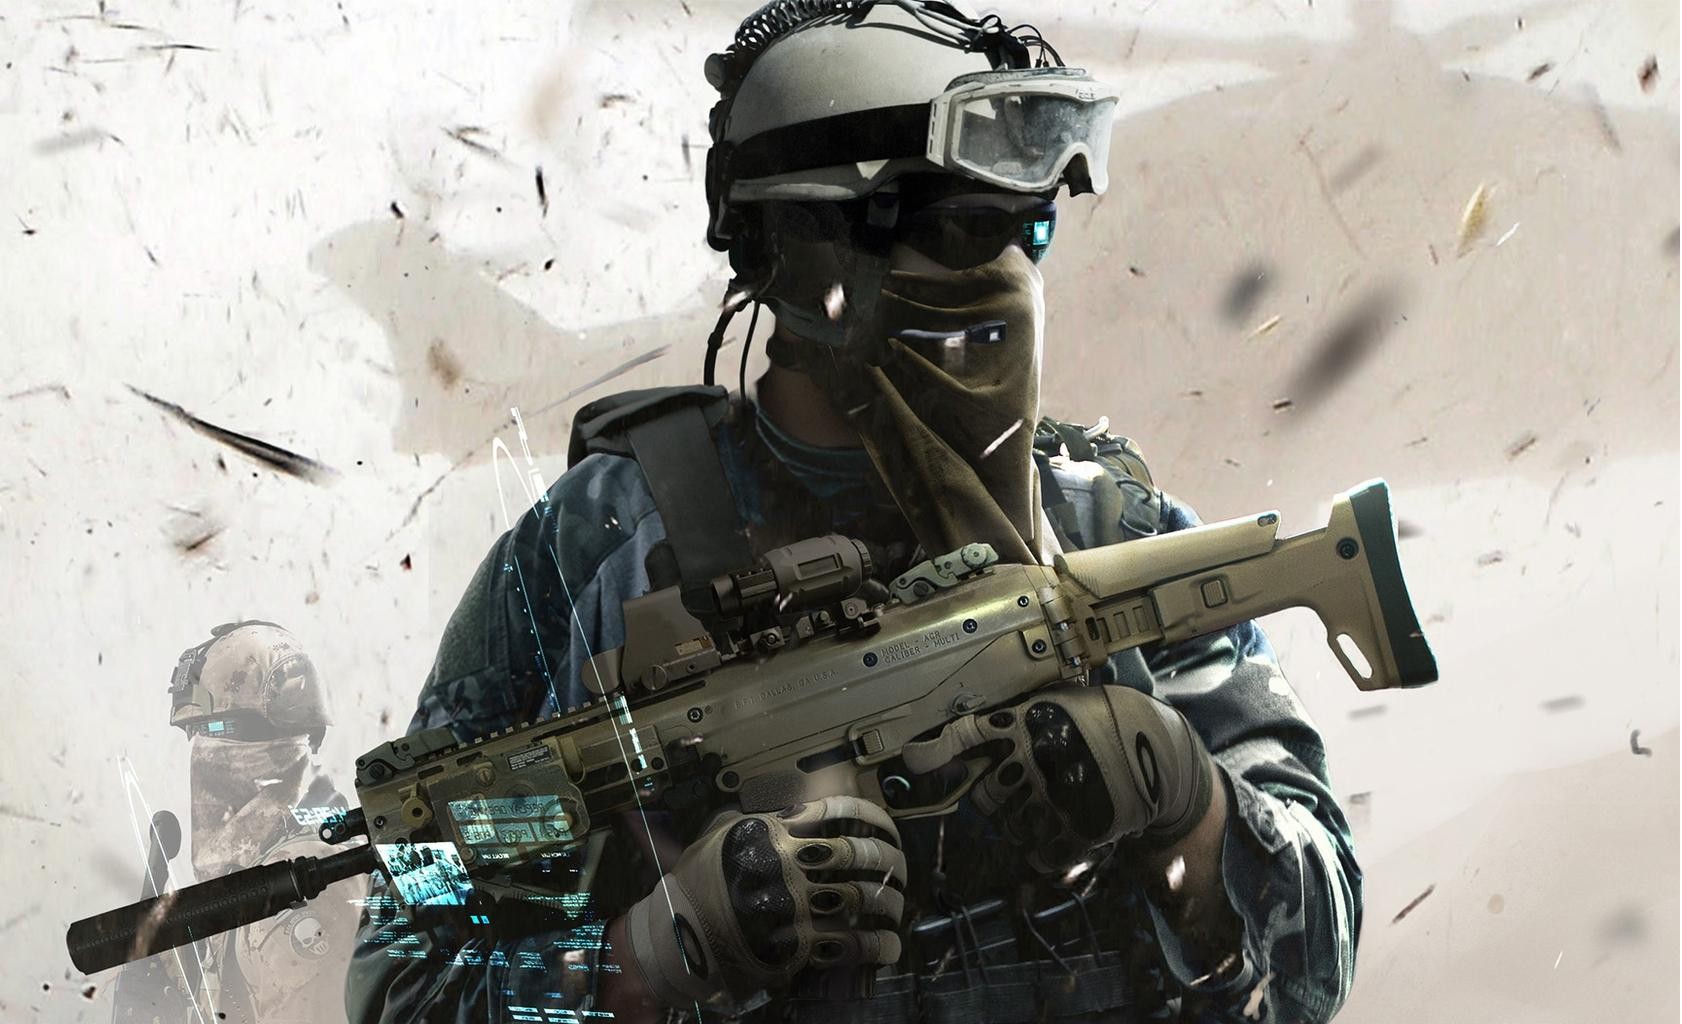 General 1682x1024 Tom Clancy's Ghost Recon: Future Soldier Tom Clancy's Ghost Recon soldier video games weapon military PC gaming video game men